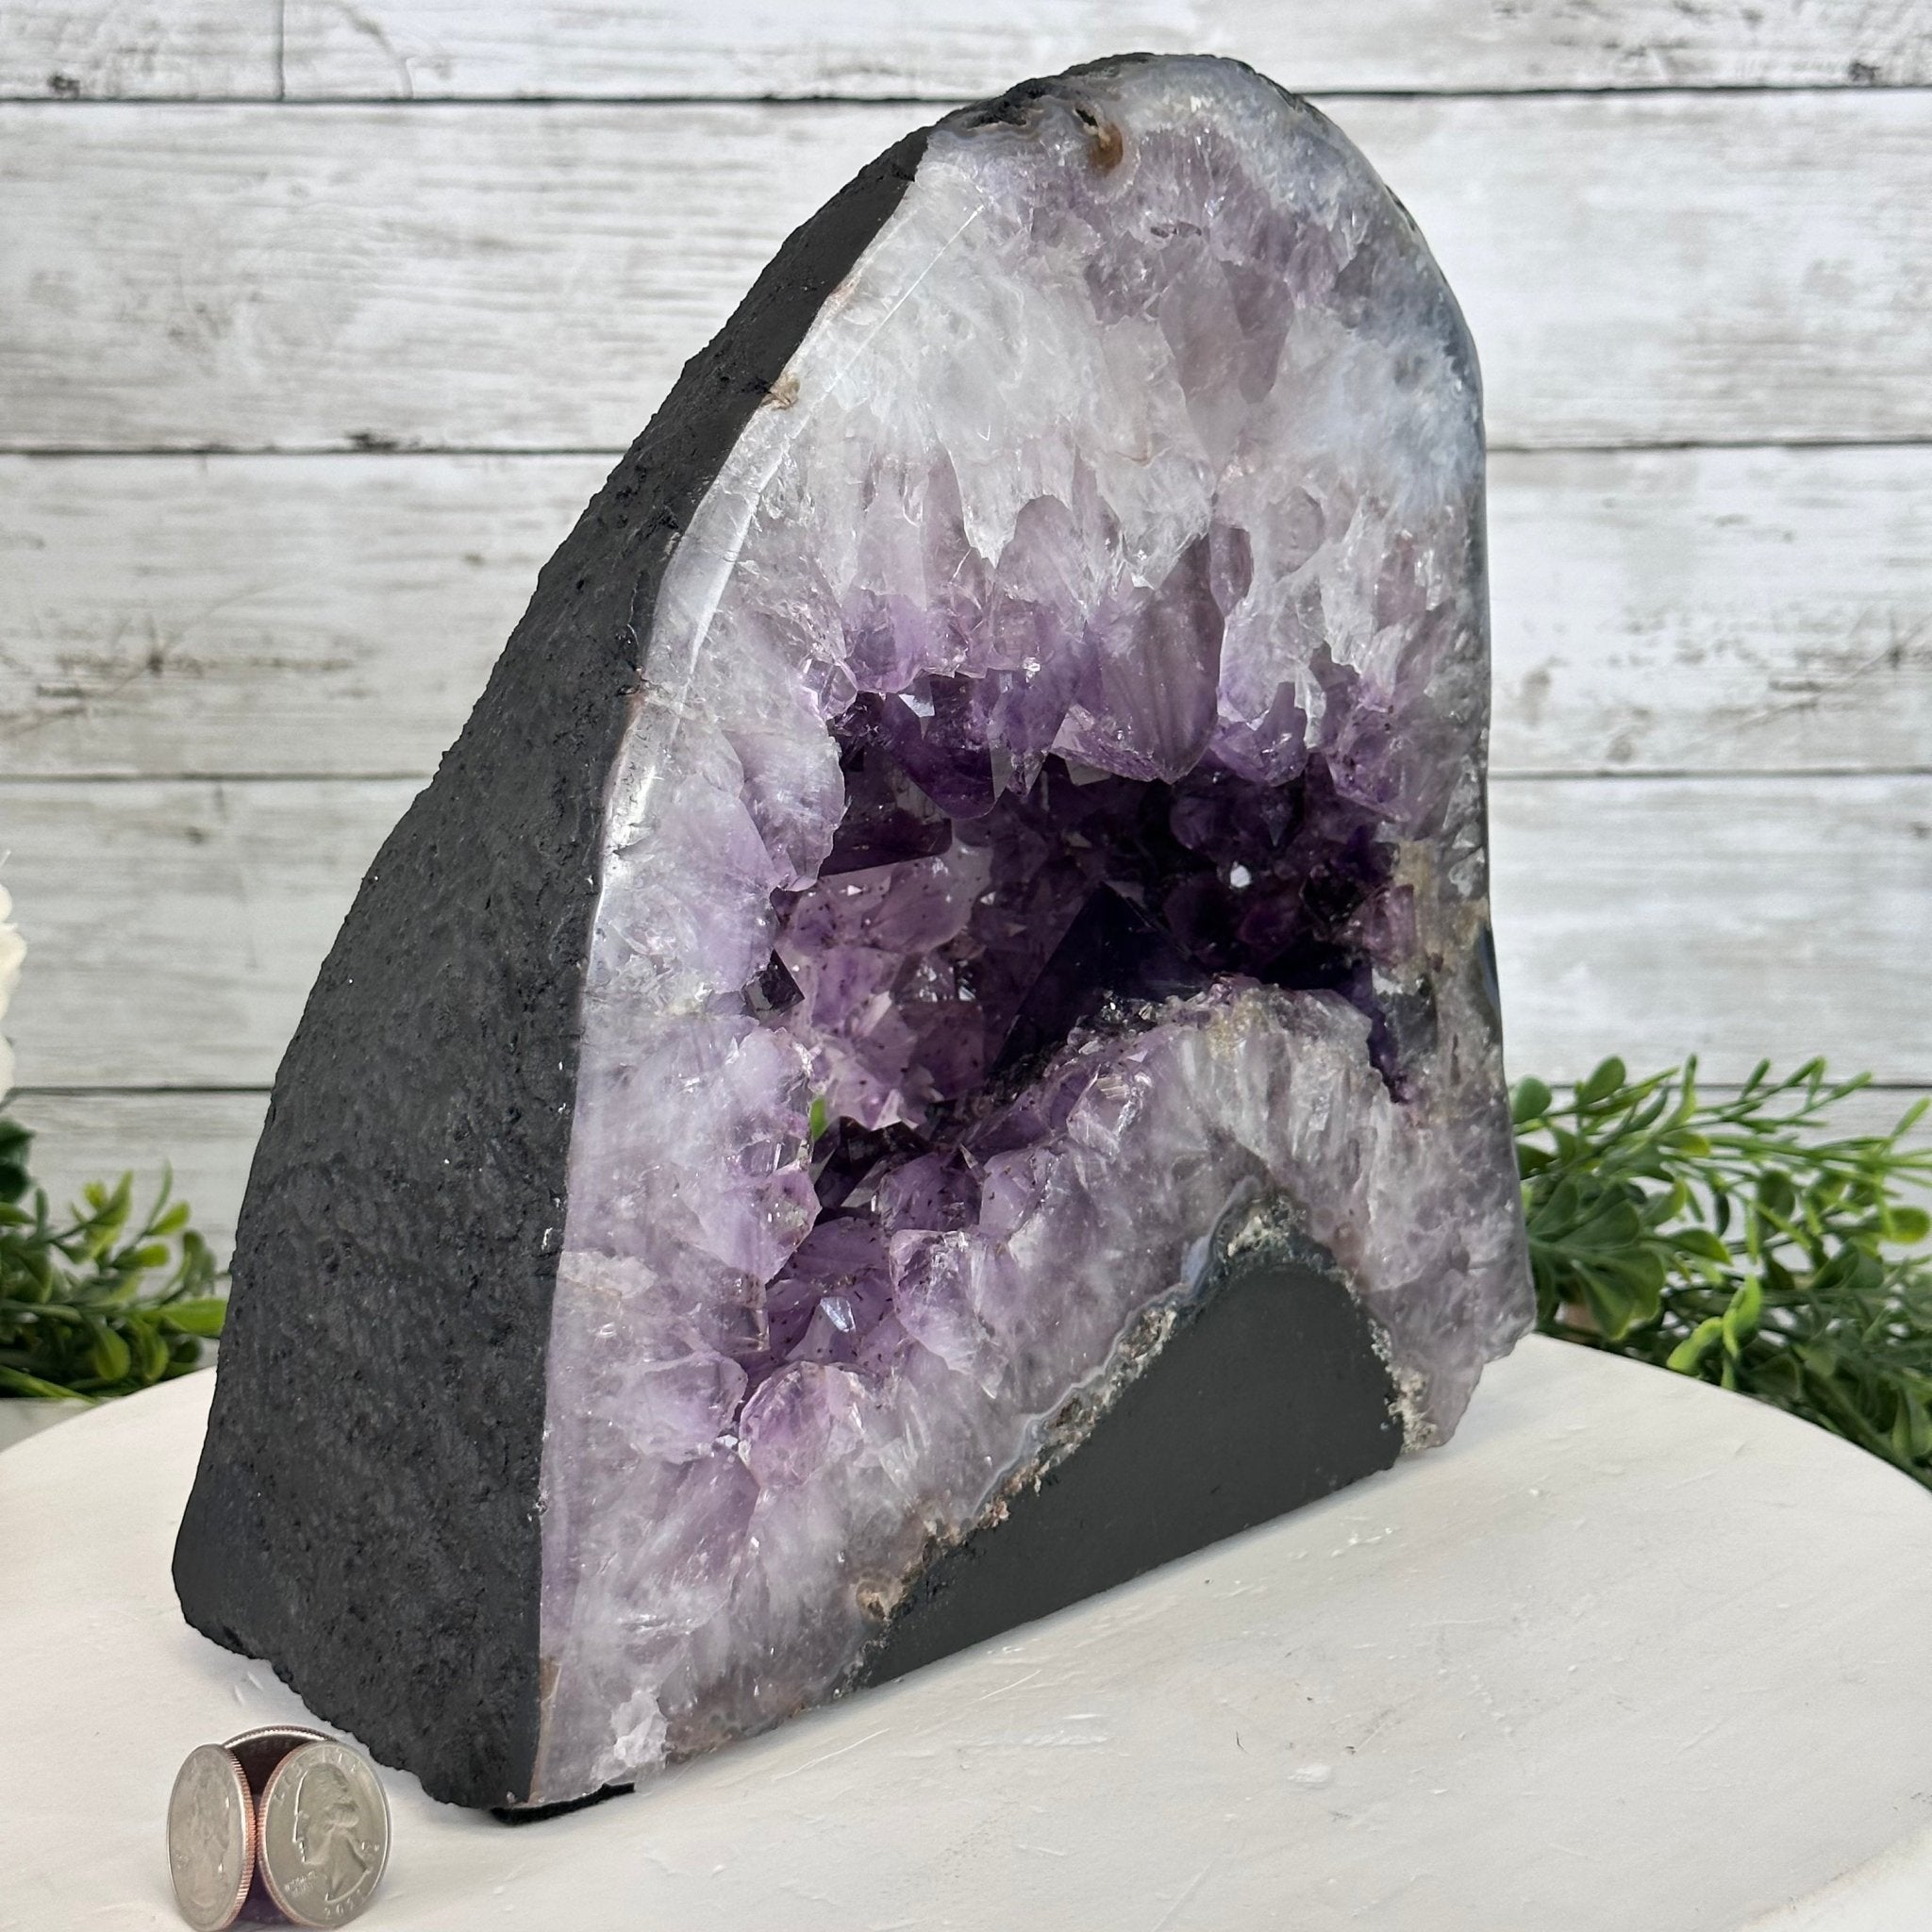 Standard Plus Quality Open 2-Sided Brazilian Amethyst Cathedral, 20.9 lbs, 9.75" tall, Model #5605-0128 by Brazil Gems - Brazil GemsBrazil GemsStandard Plus Quality Open 2-Sided Brazilian Amethyst Cathedral, 20.9 lbs, 9.75" tall, Model #5605-0128 by Brazil GemsOpen 2-Sided Cathedrals5605-0128